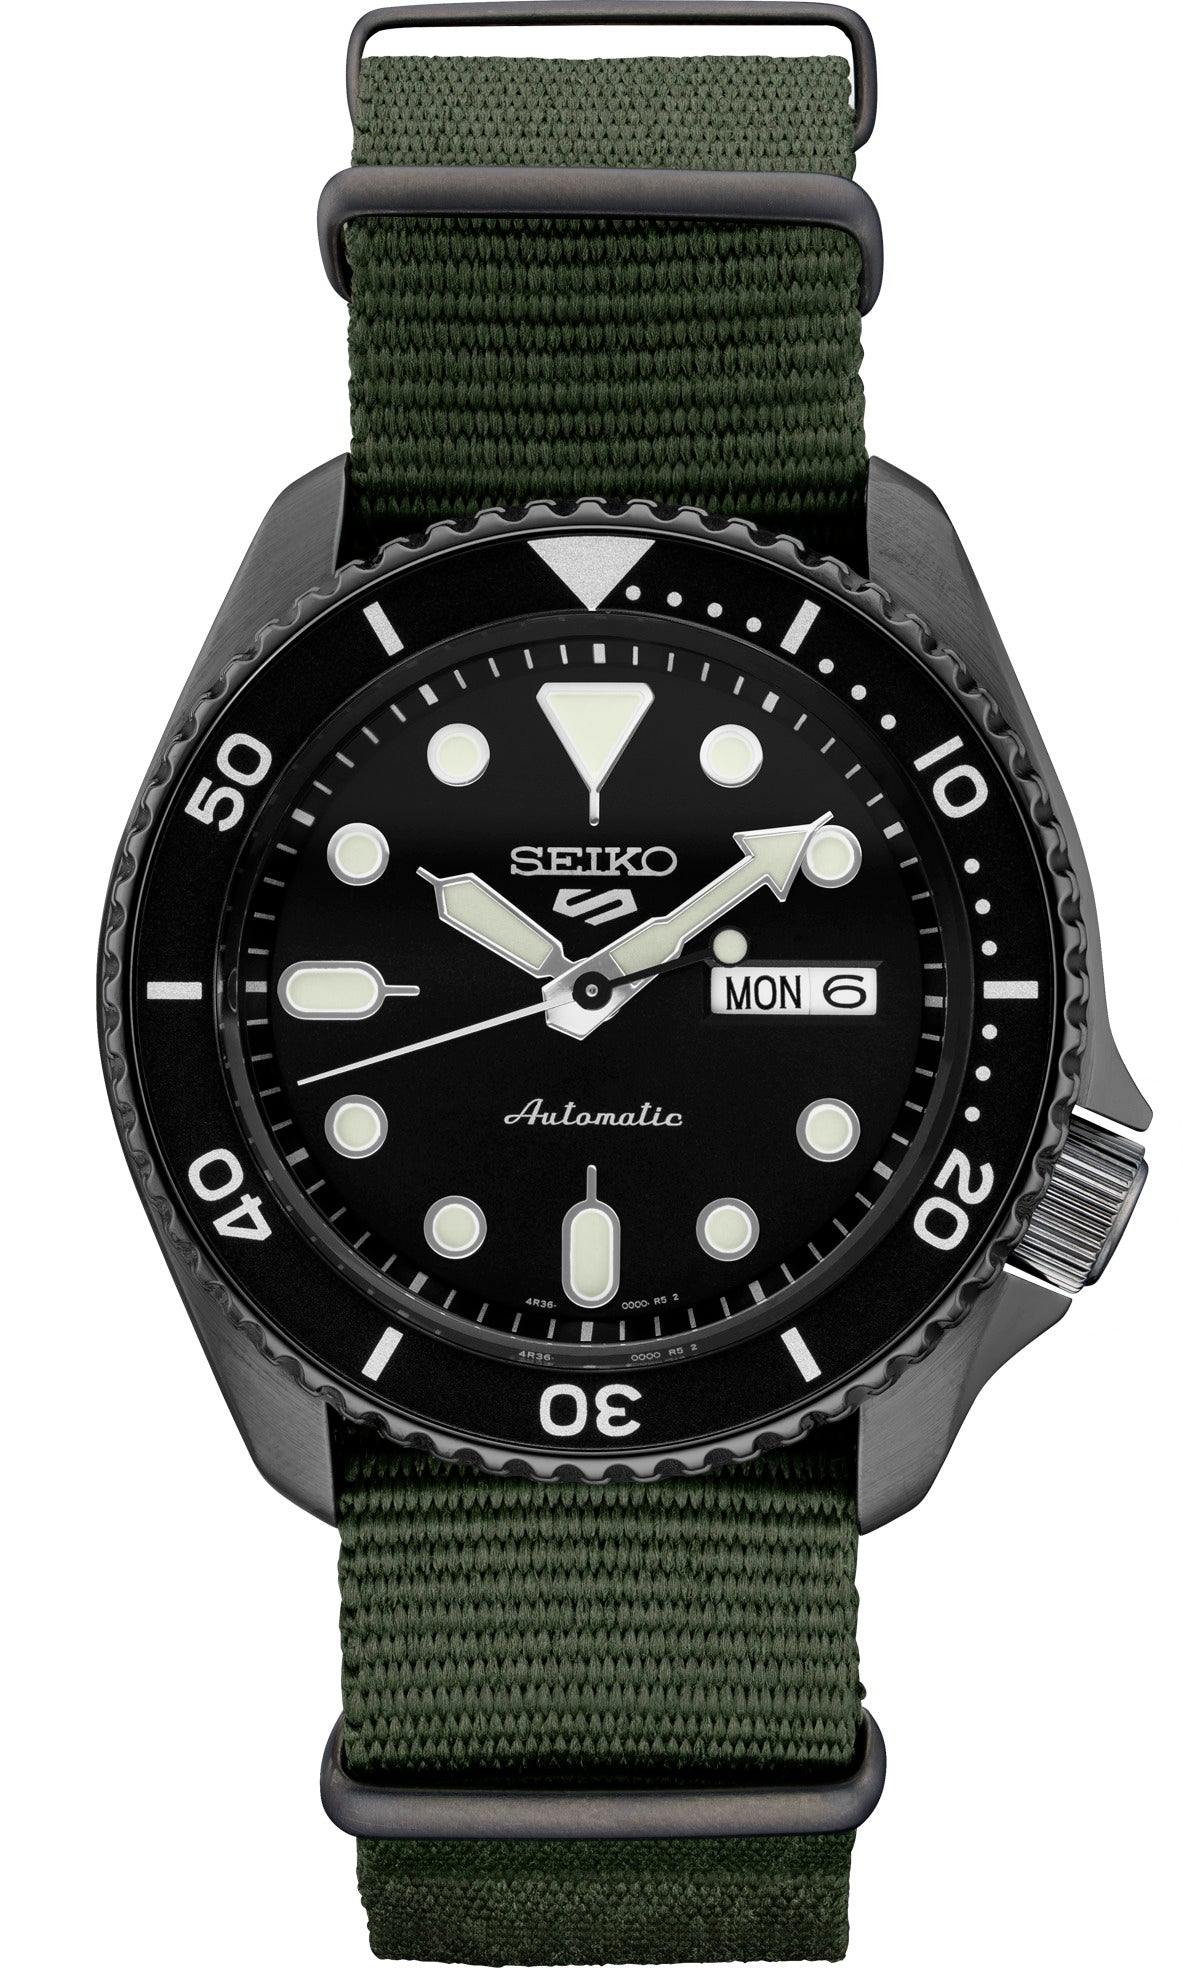 Seiko 5 Sports Men's Stainless Watch in color Green, Black from the front view